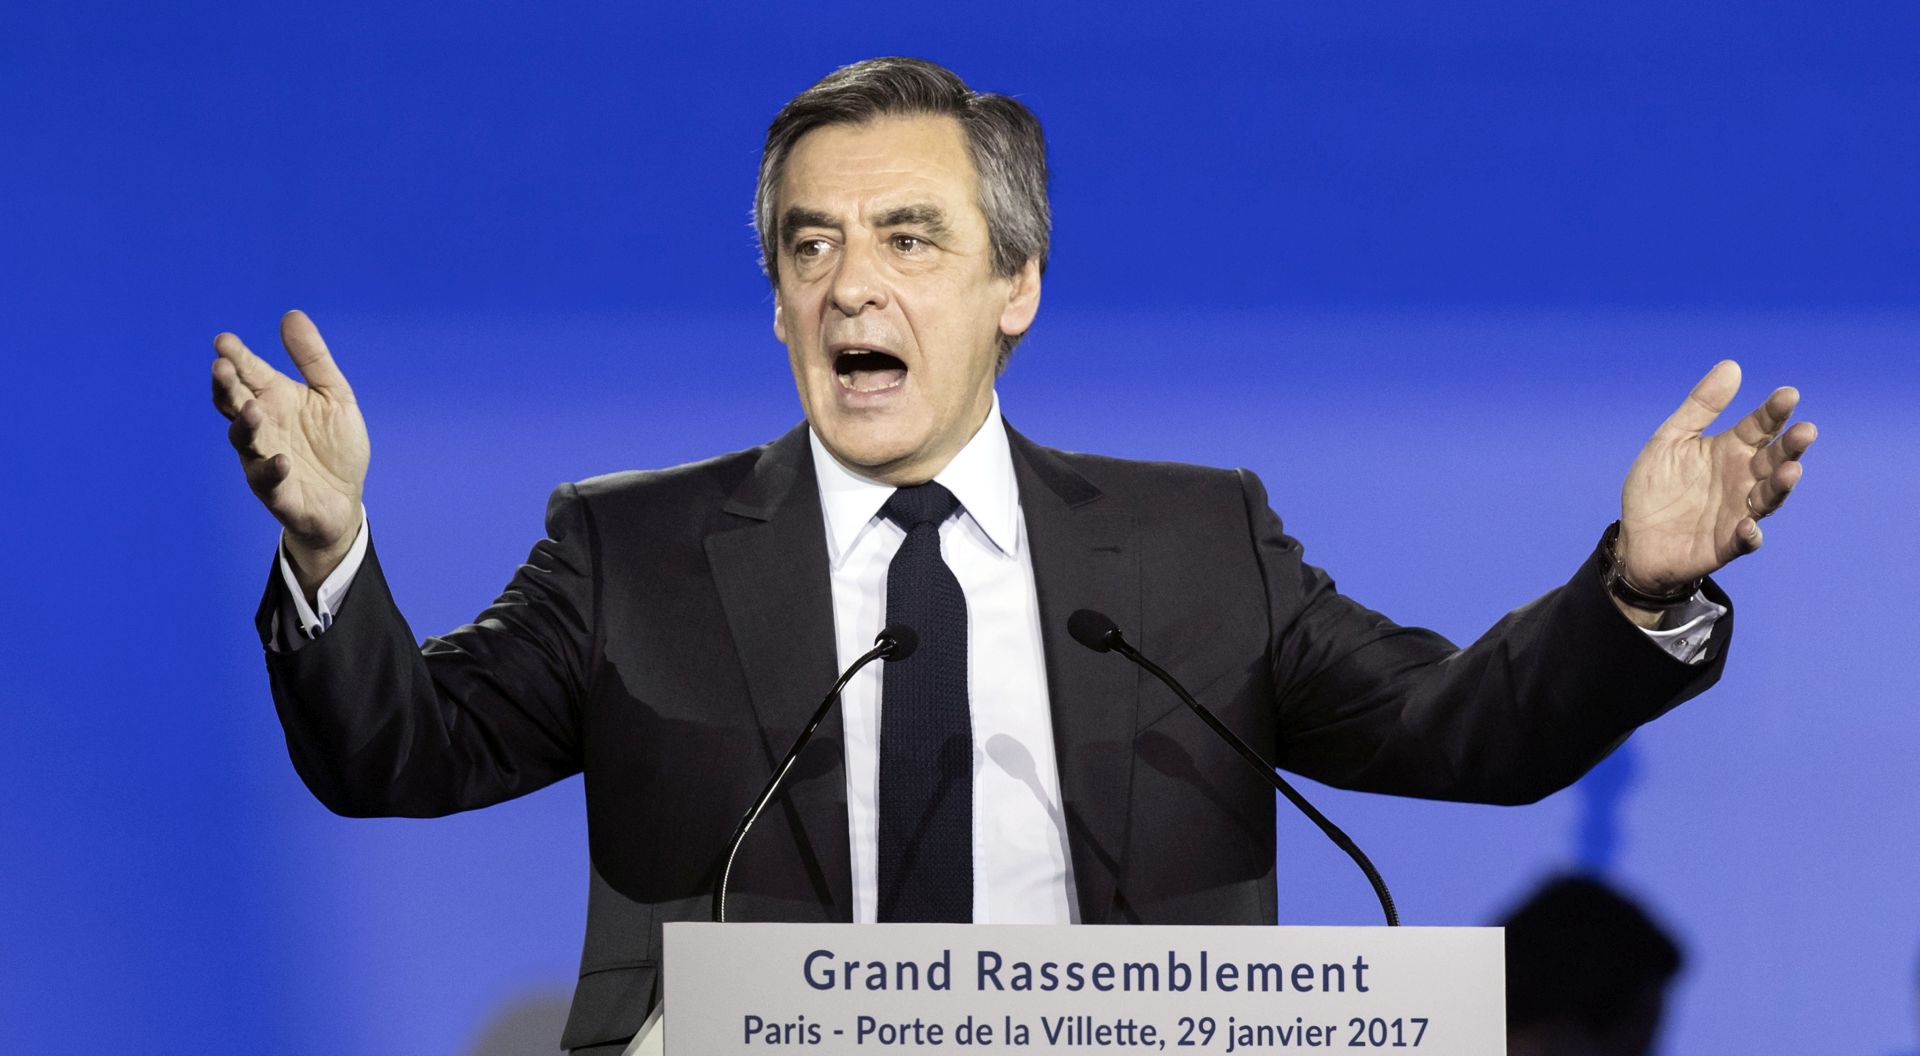 epa05760085 Former French Prime Minister and Les Republicains political party candidate for the 2017 presidential election Francois Fillon, addresses a political rally in Paris, France, 29 January 2017. Francois Fillon has come under pressure to explain the previous employment of his wife as parliamentary aide while he was a MP and to give details of the work she did. French MPs are allowed to employ family members as aides.  EPA/ETIENNE LAURENT